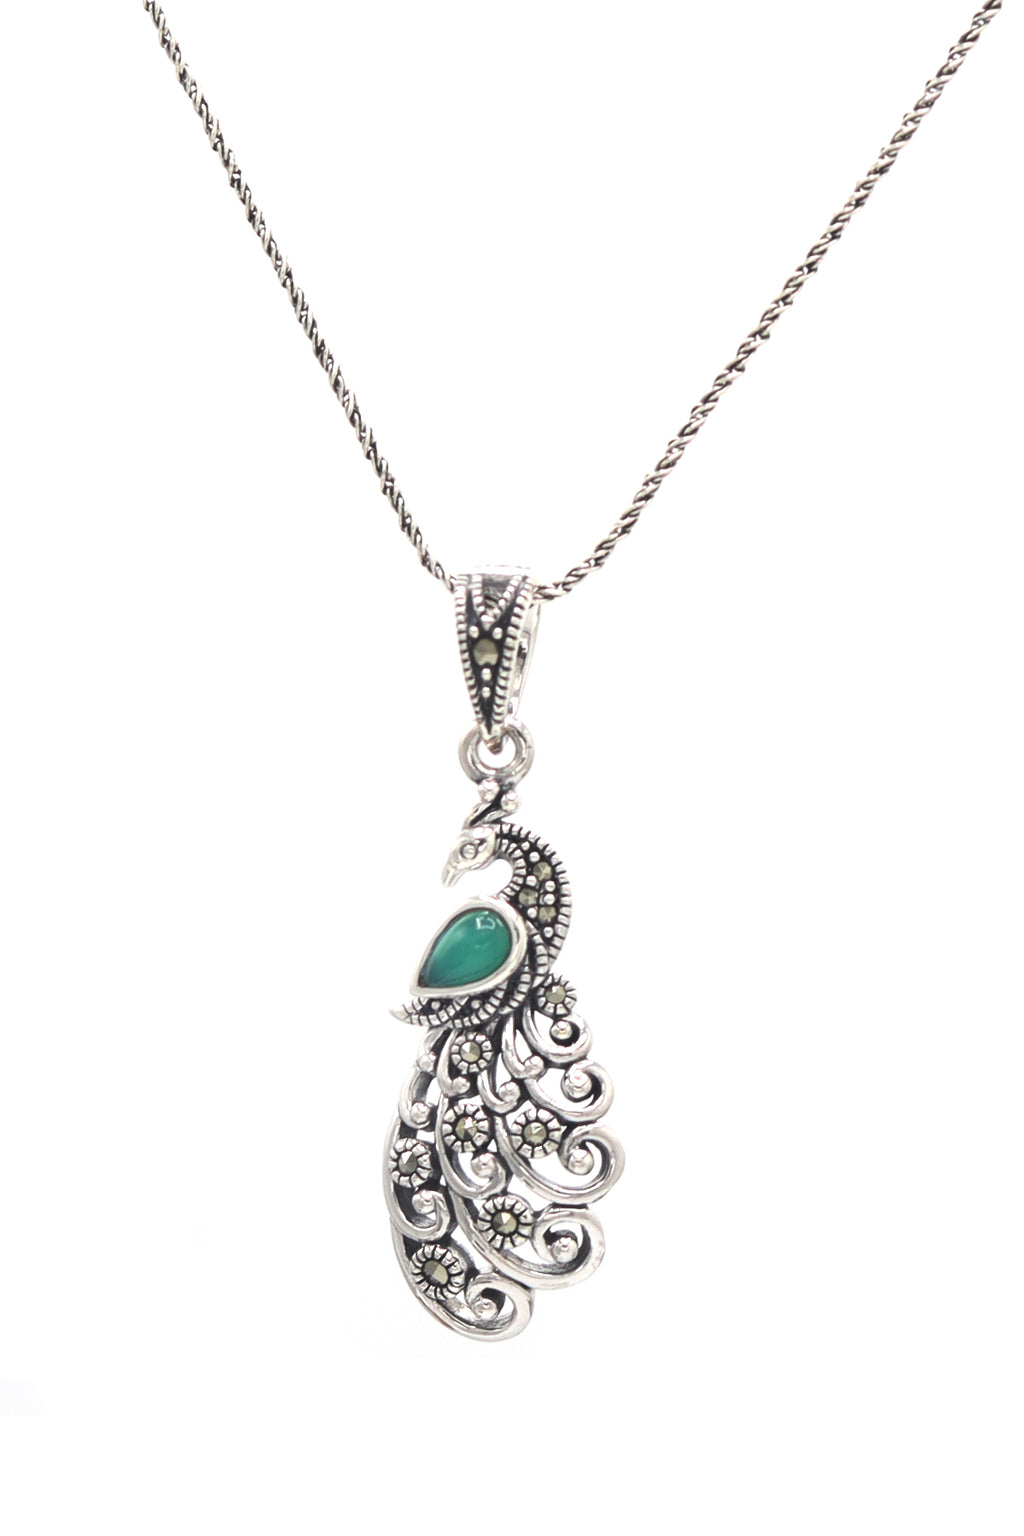 Peacocks Model Handmade Silver Necklace With Emerald (NG201021592)